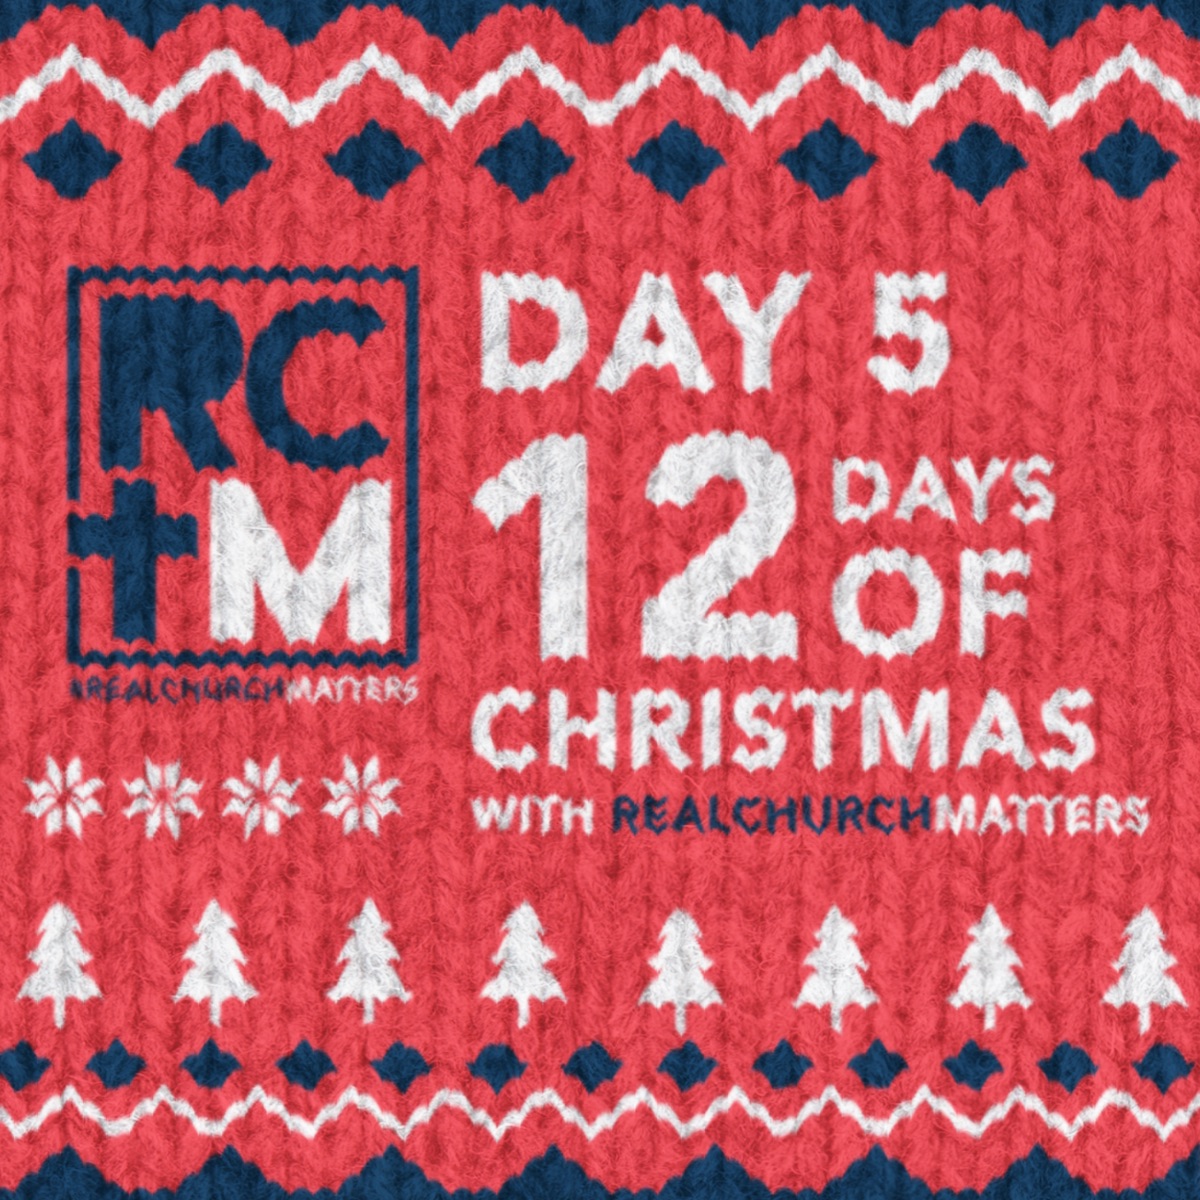 Day 5 of the 12 Days of Christmas with Real Church Matters